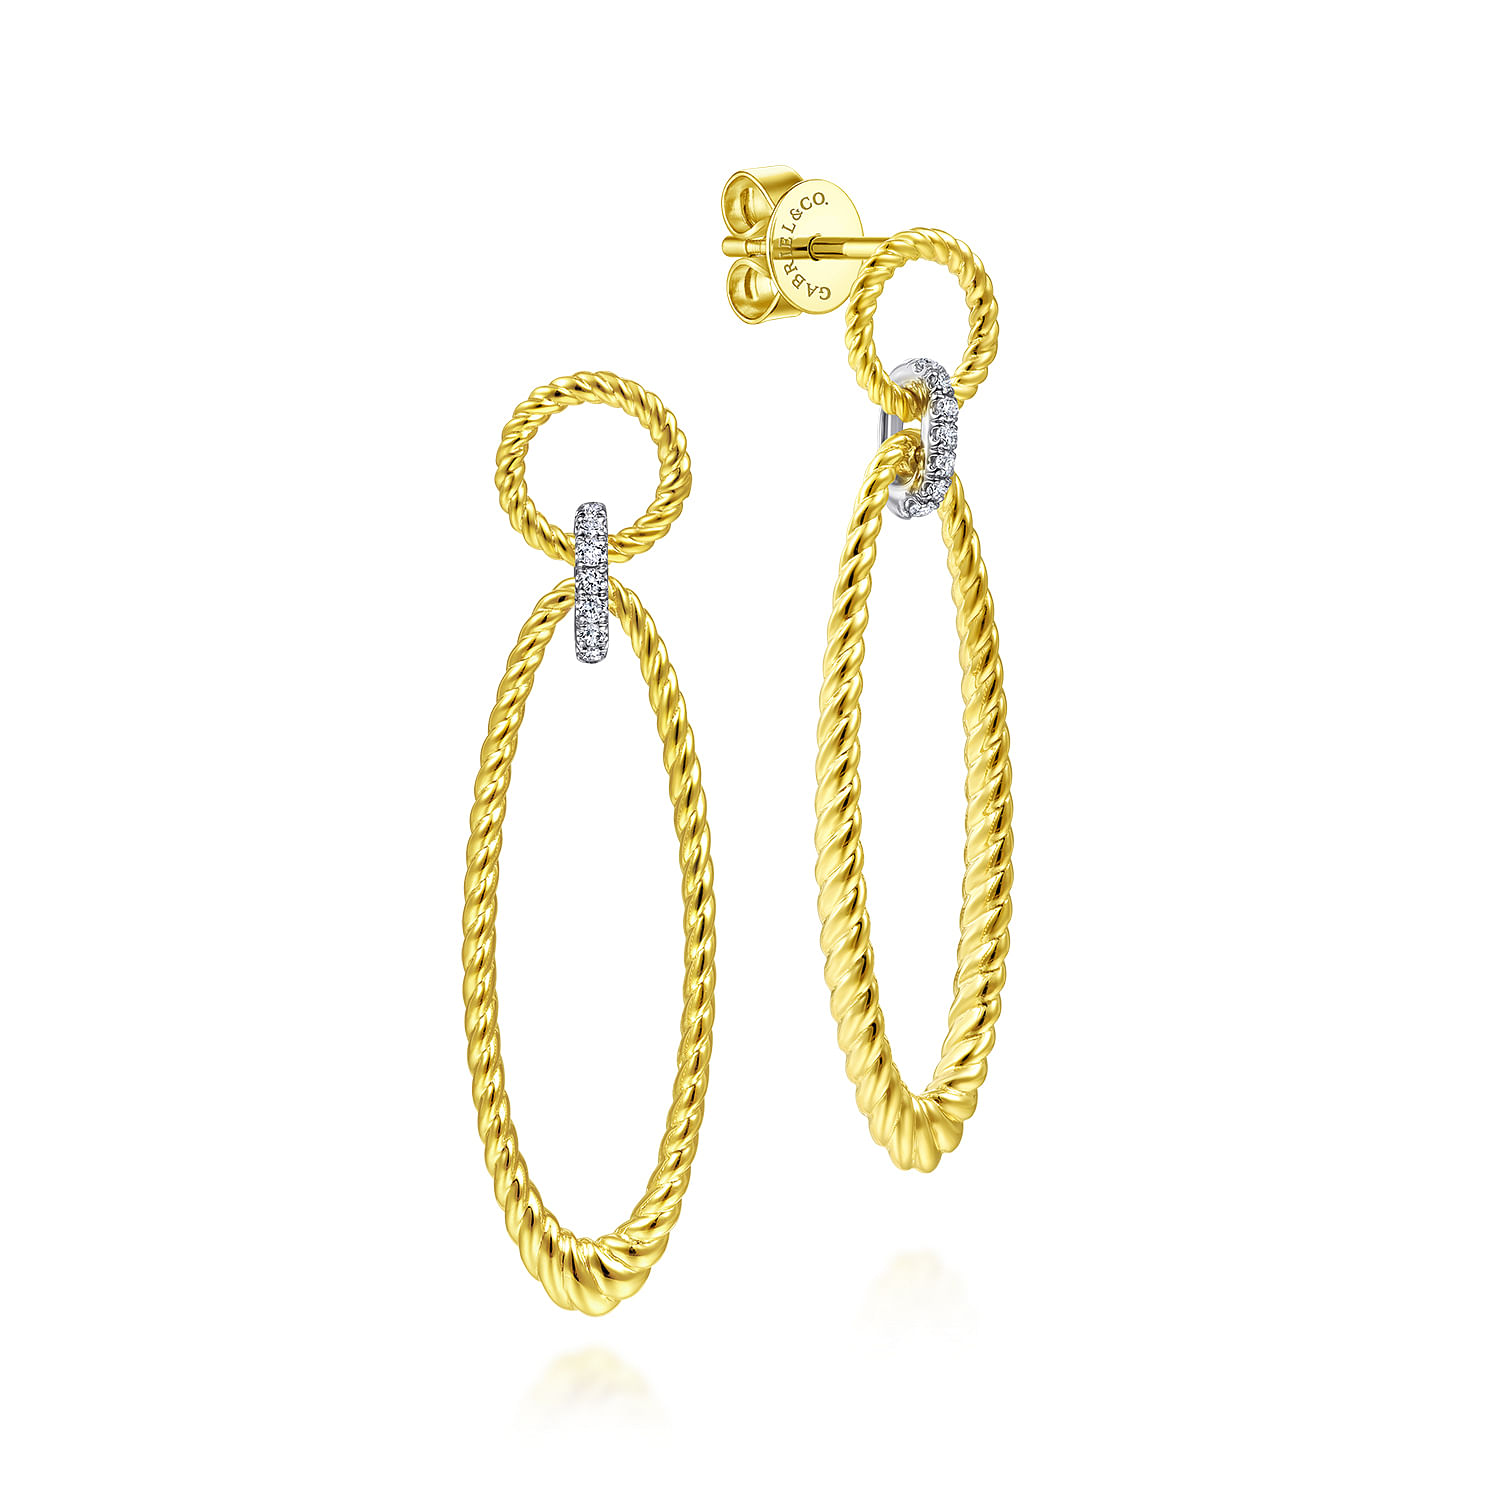 14K Yellow-White Gold Twisted Rope Open Shape Earrings with Diamond Connector